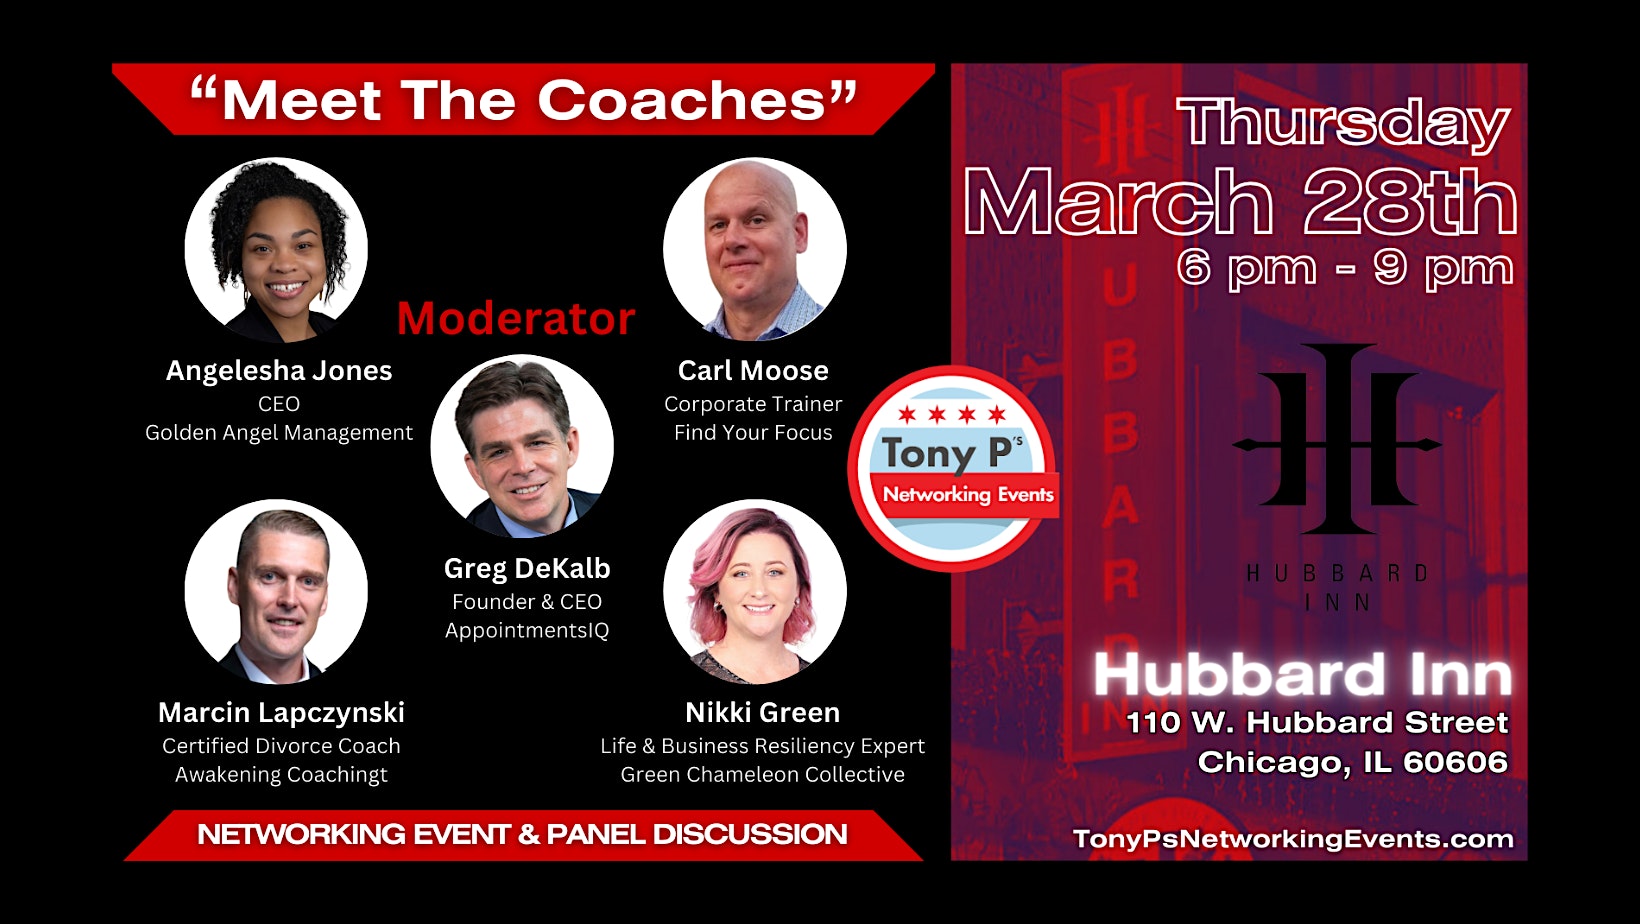 Tony P’s “Meet The Coaches” Networking Event & Panel Discussion: Mar 28th